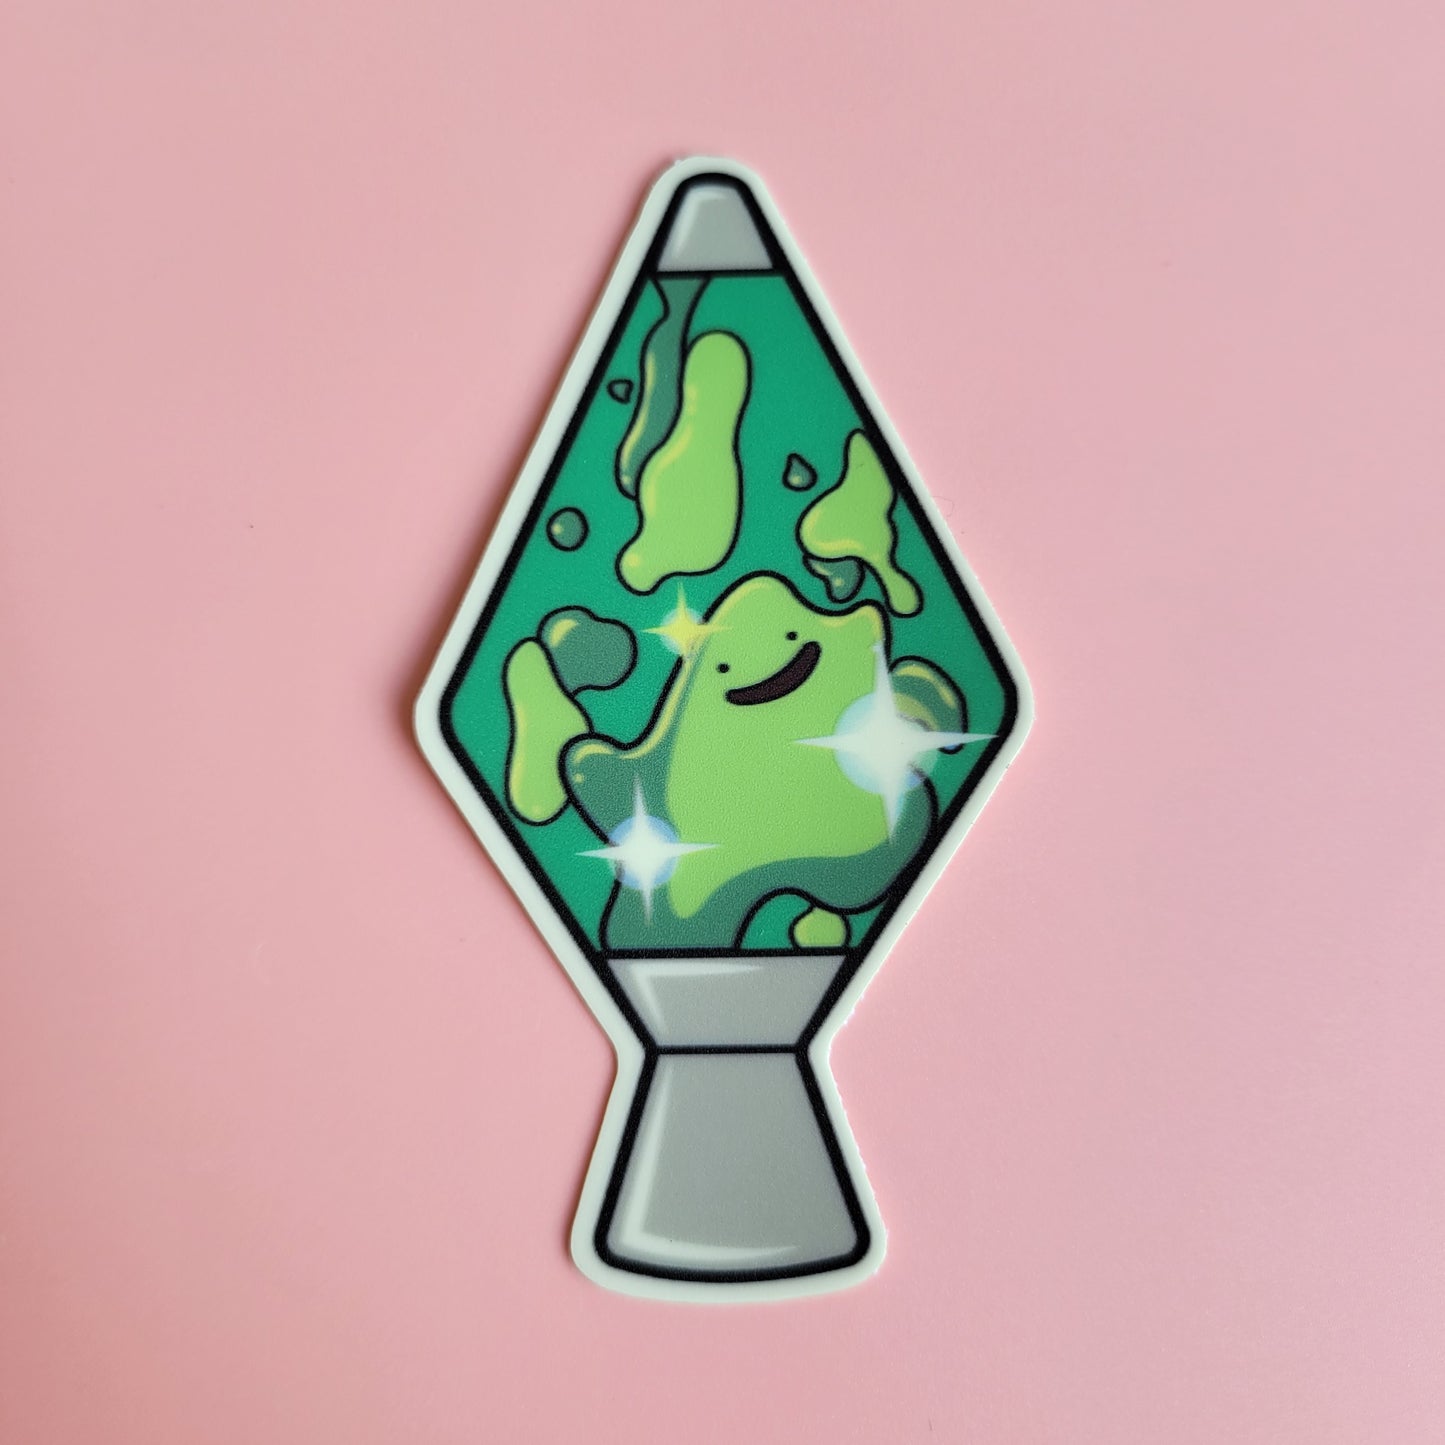 thewhylime: Stickers